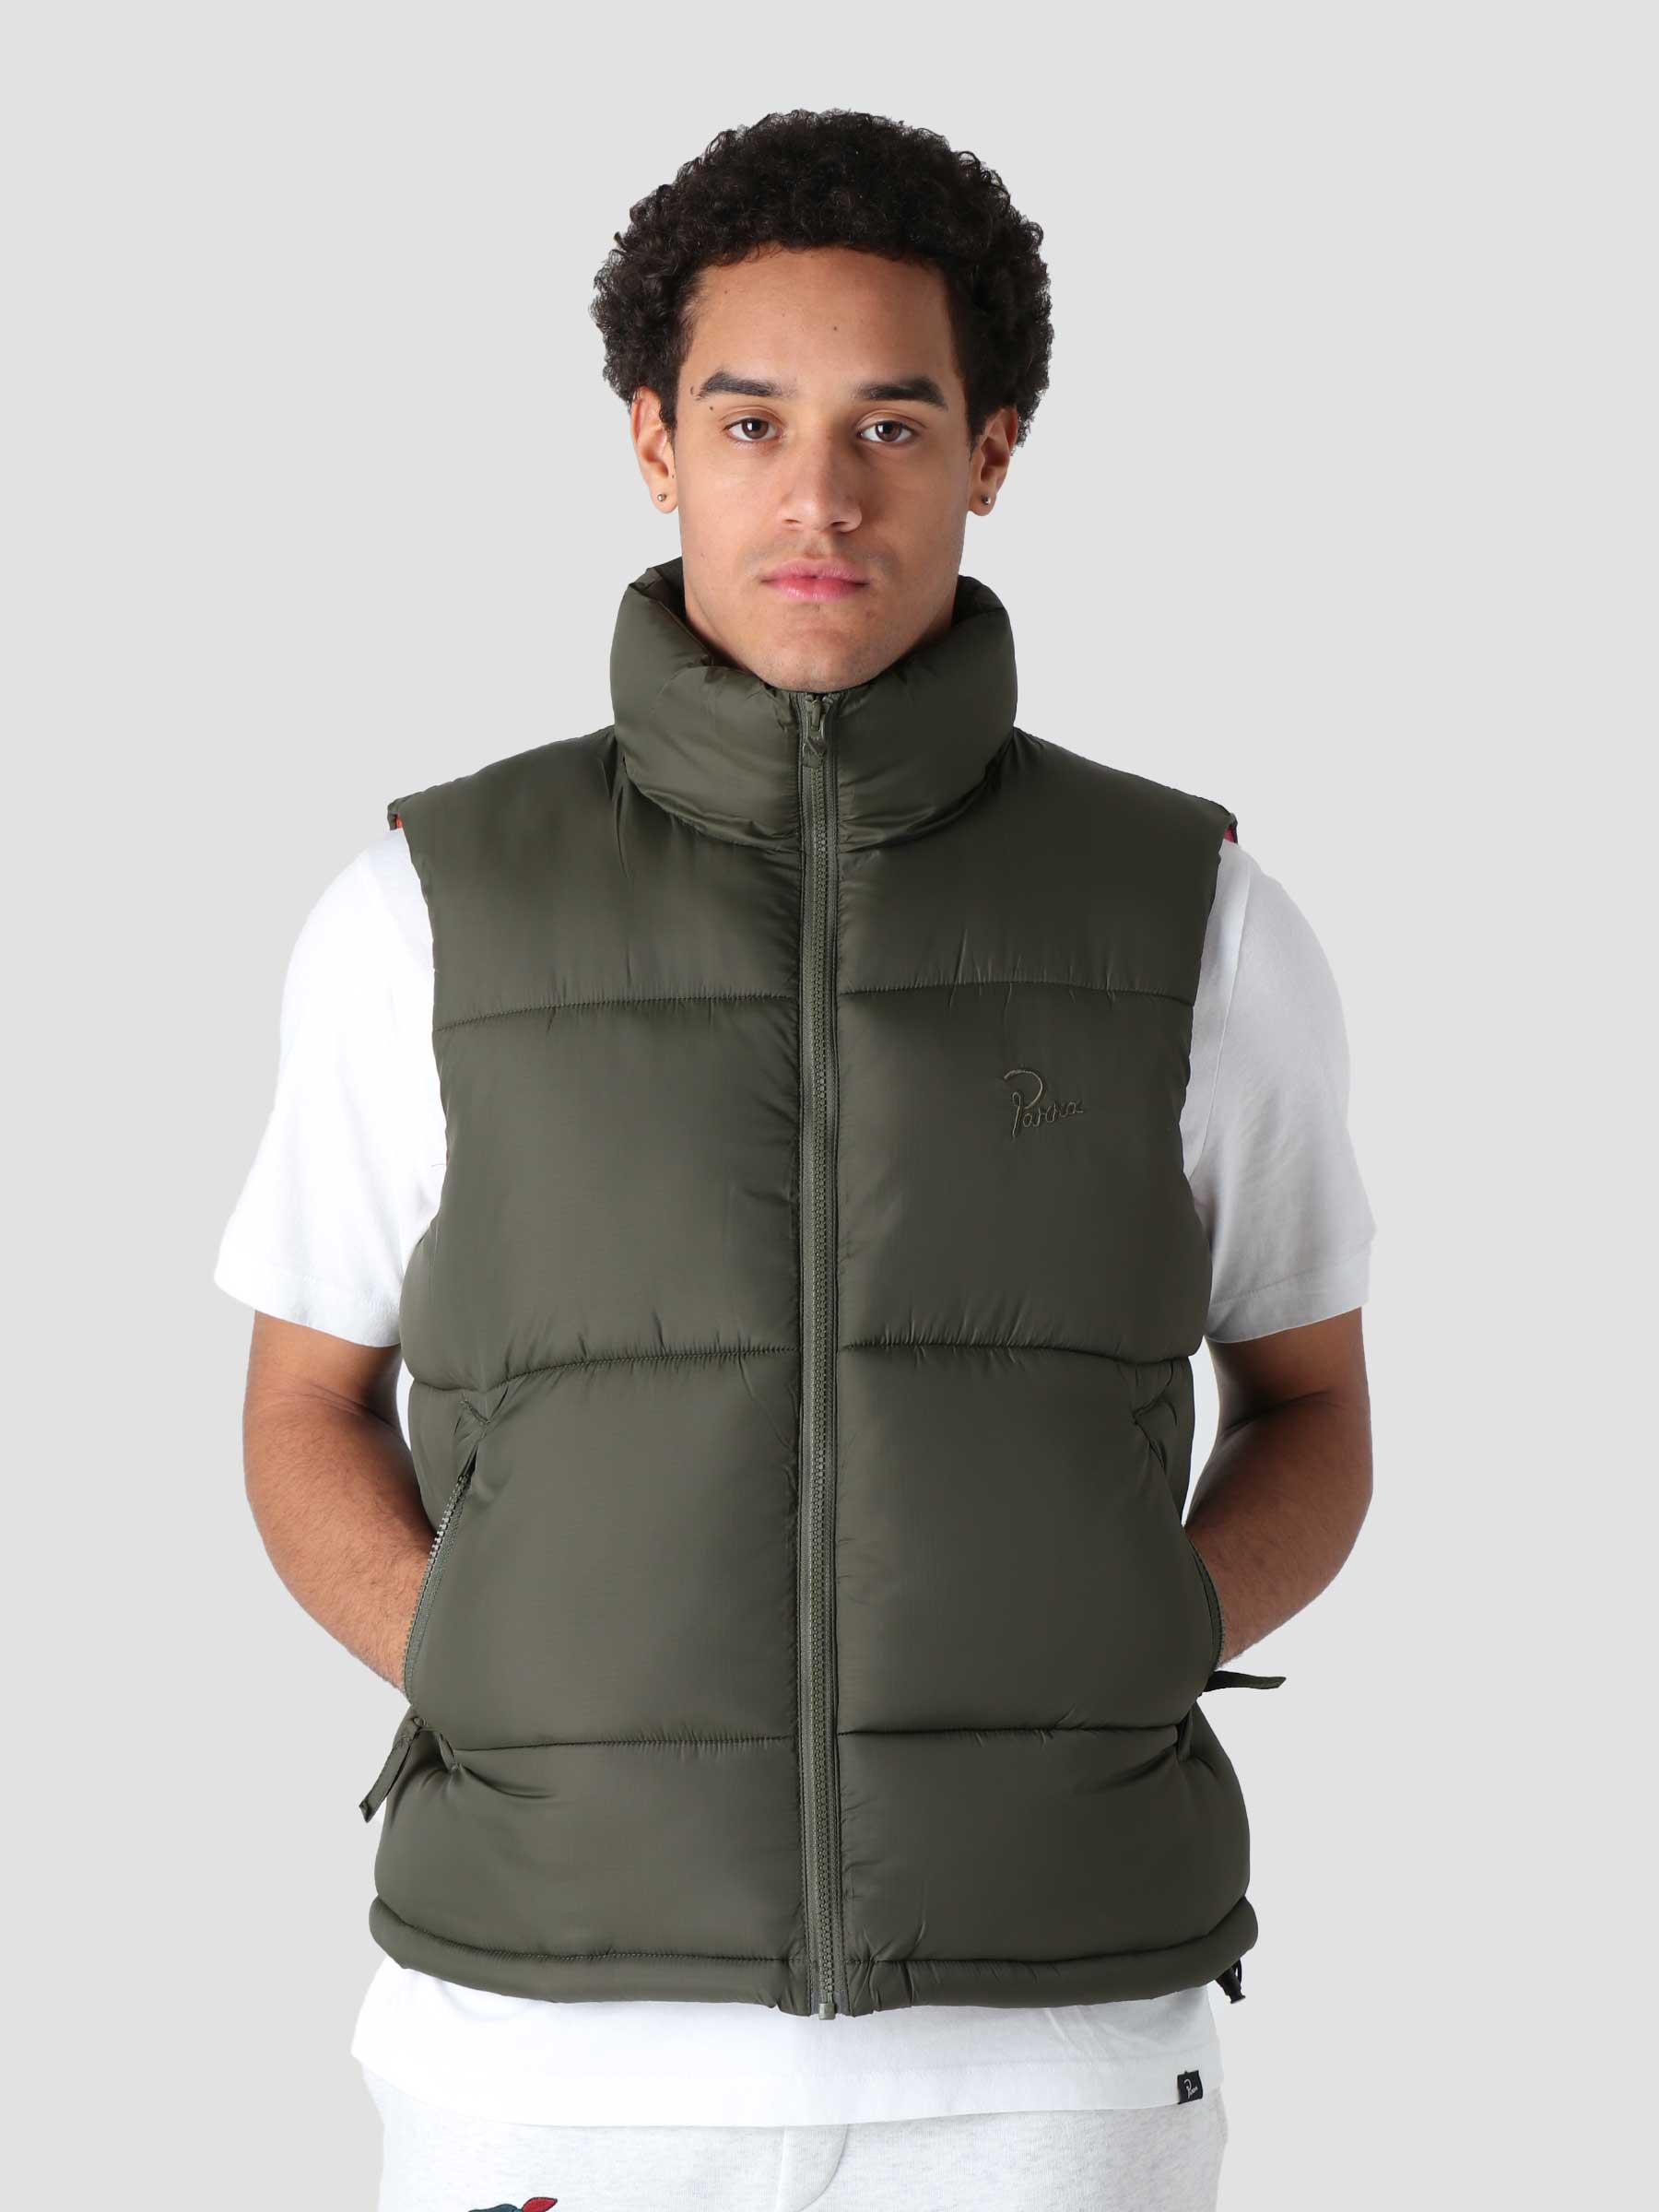 by Parra Sitting Pear Puffer Vest Olive - Freshcotton